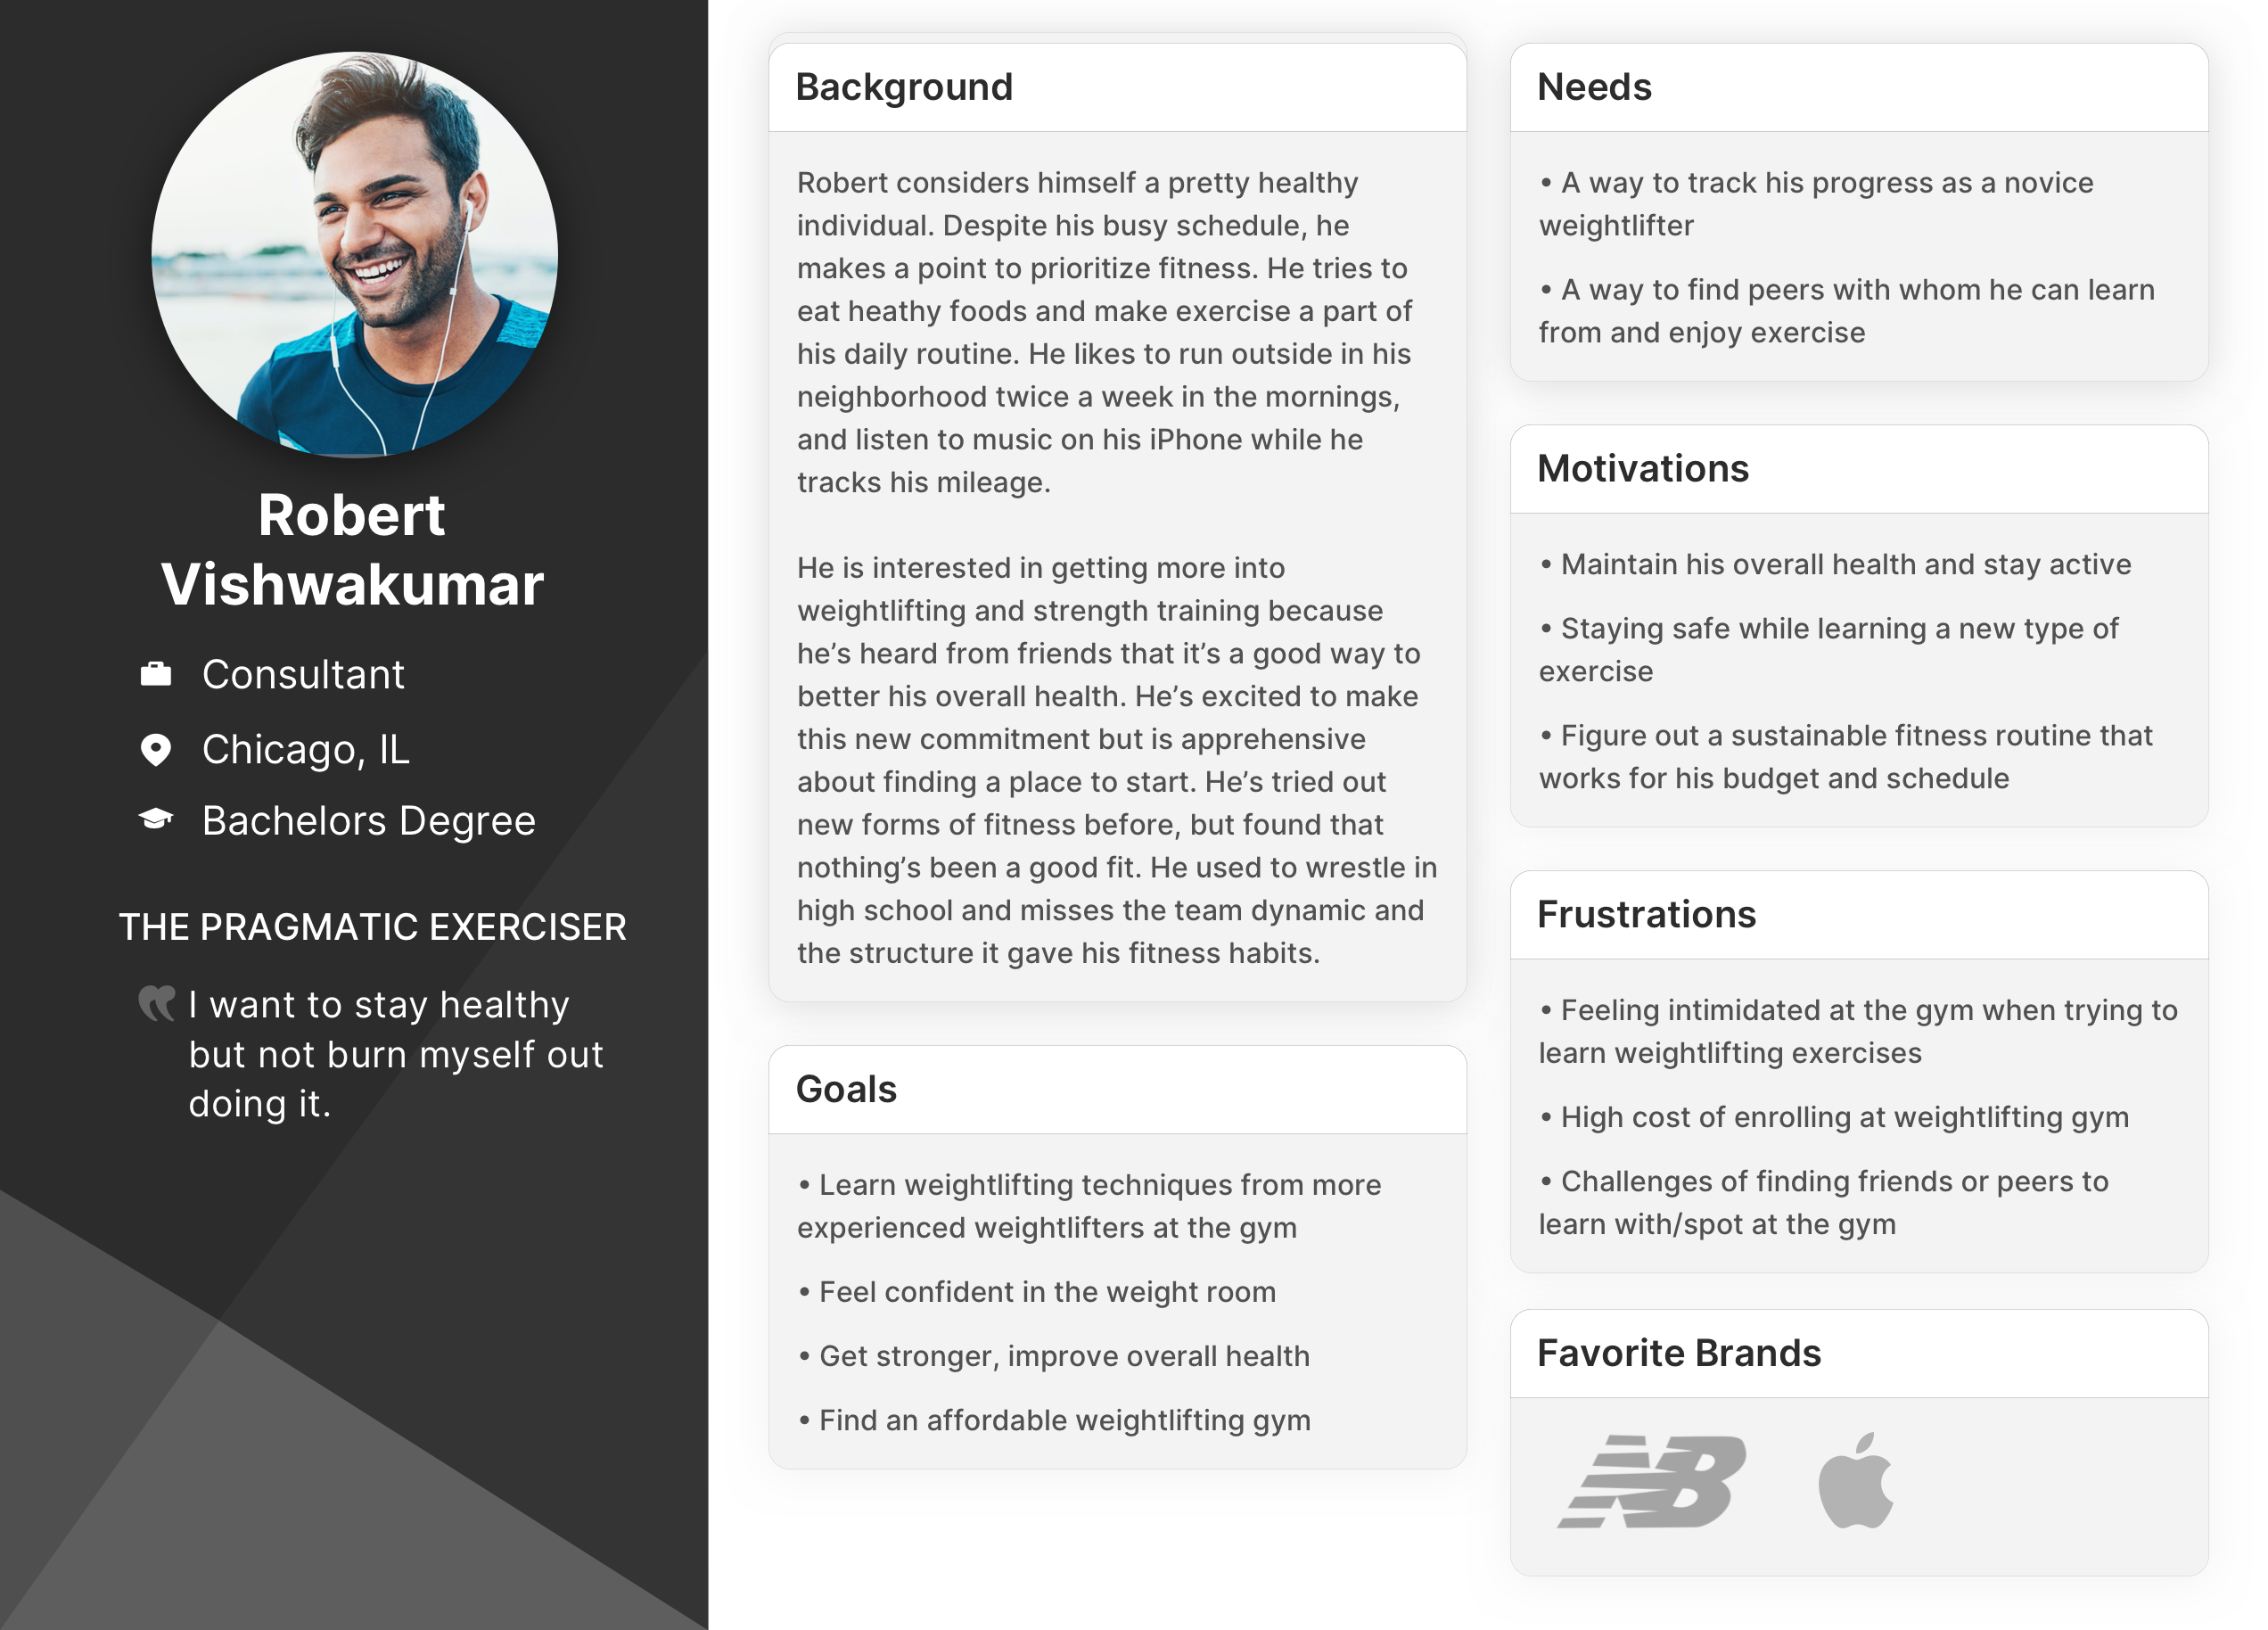 Photo of Robert Vishwakumar persona, including background, motivations, needs, frustrations, goals, and favorite brands: New Balance and Apple.